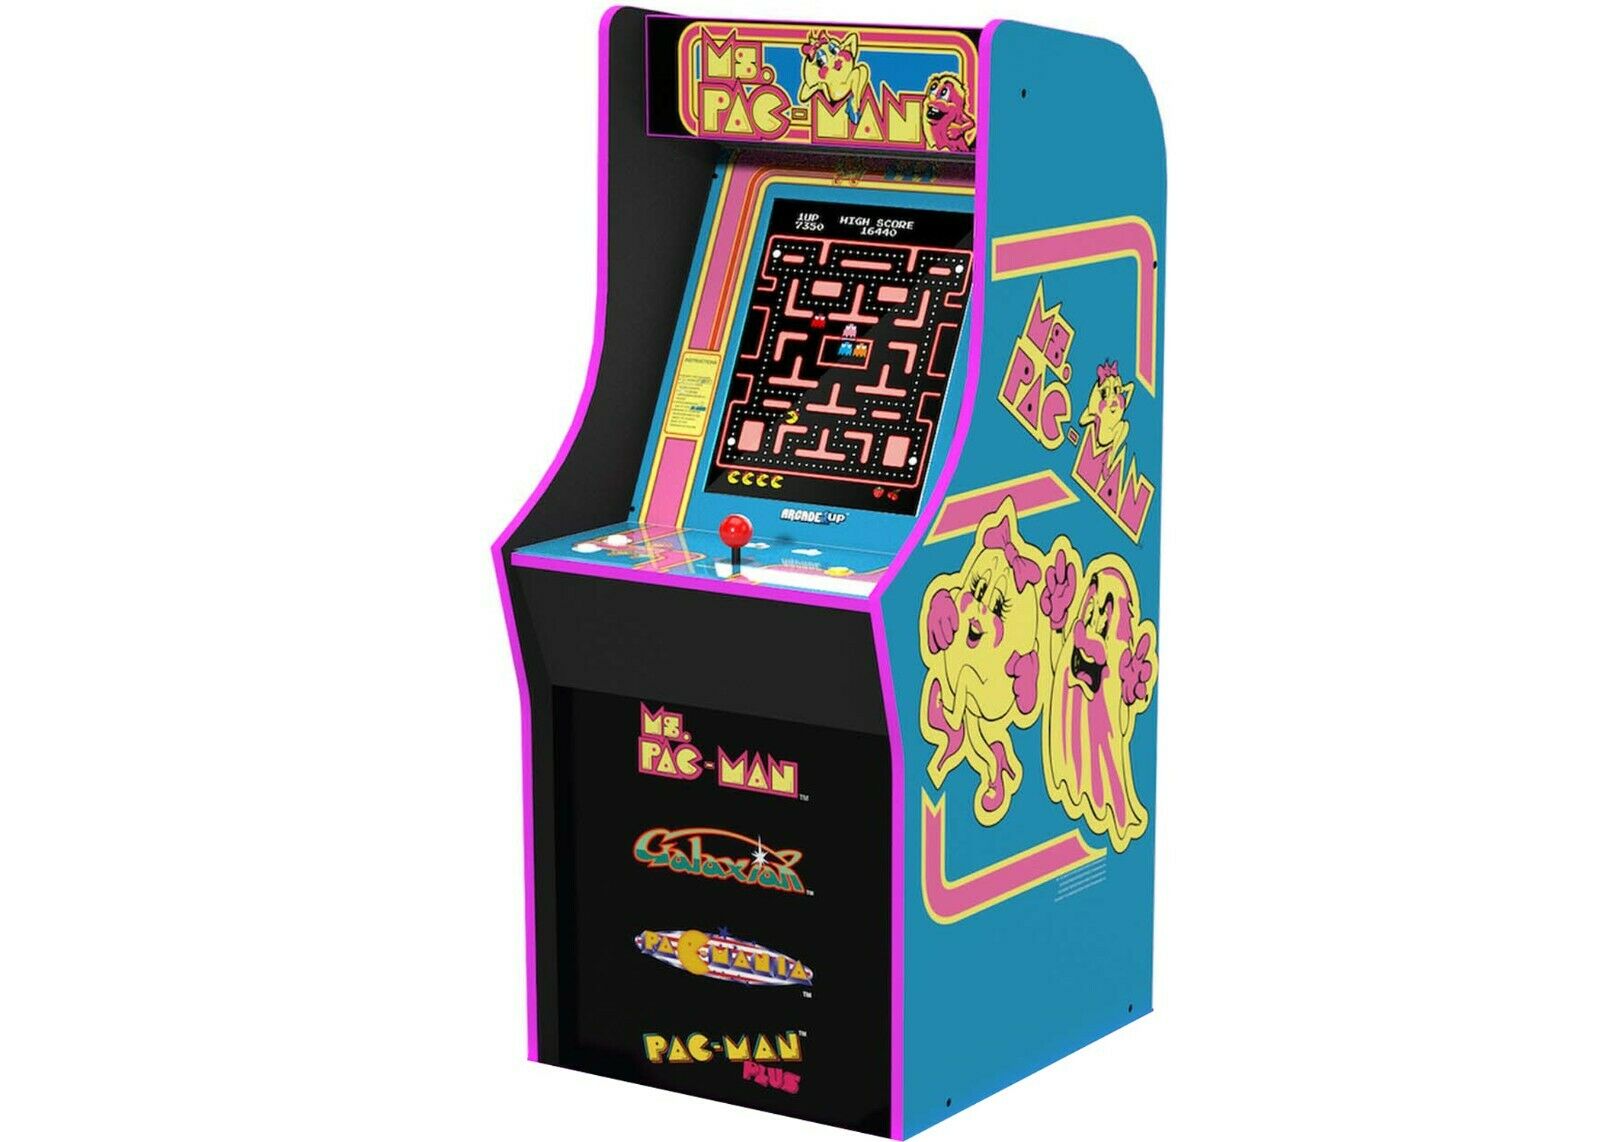 Arcade1Up, Ms. Pacman Arcade Machine with Riser - image 3 of 6